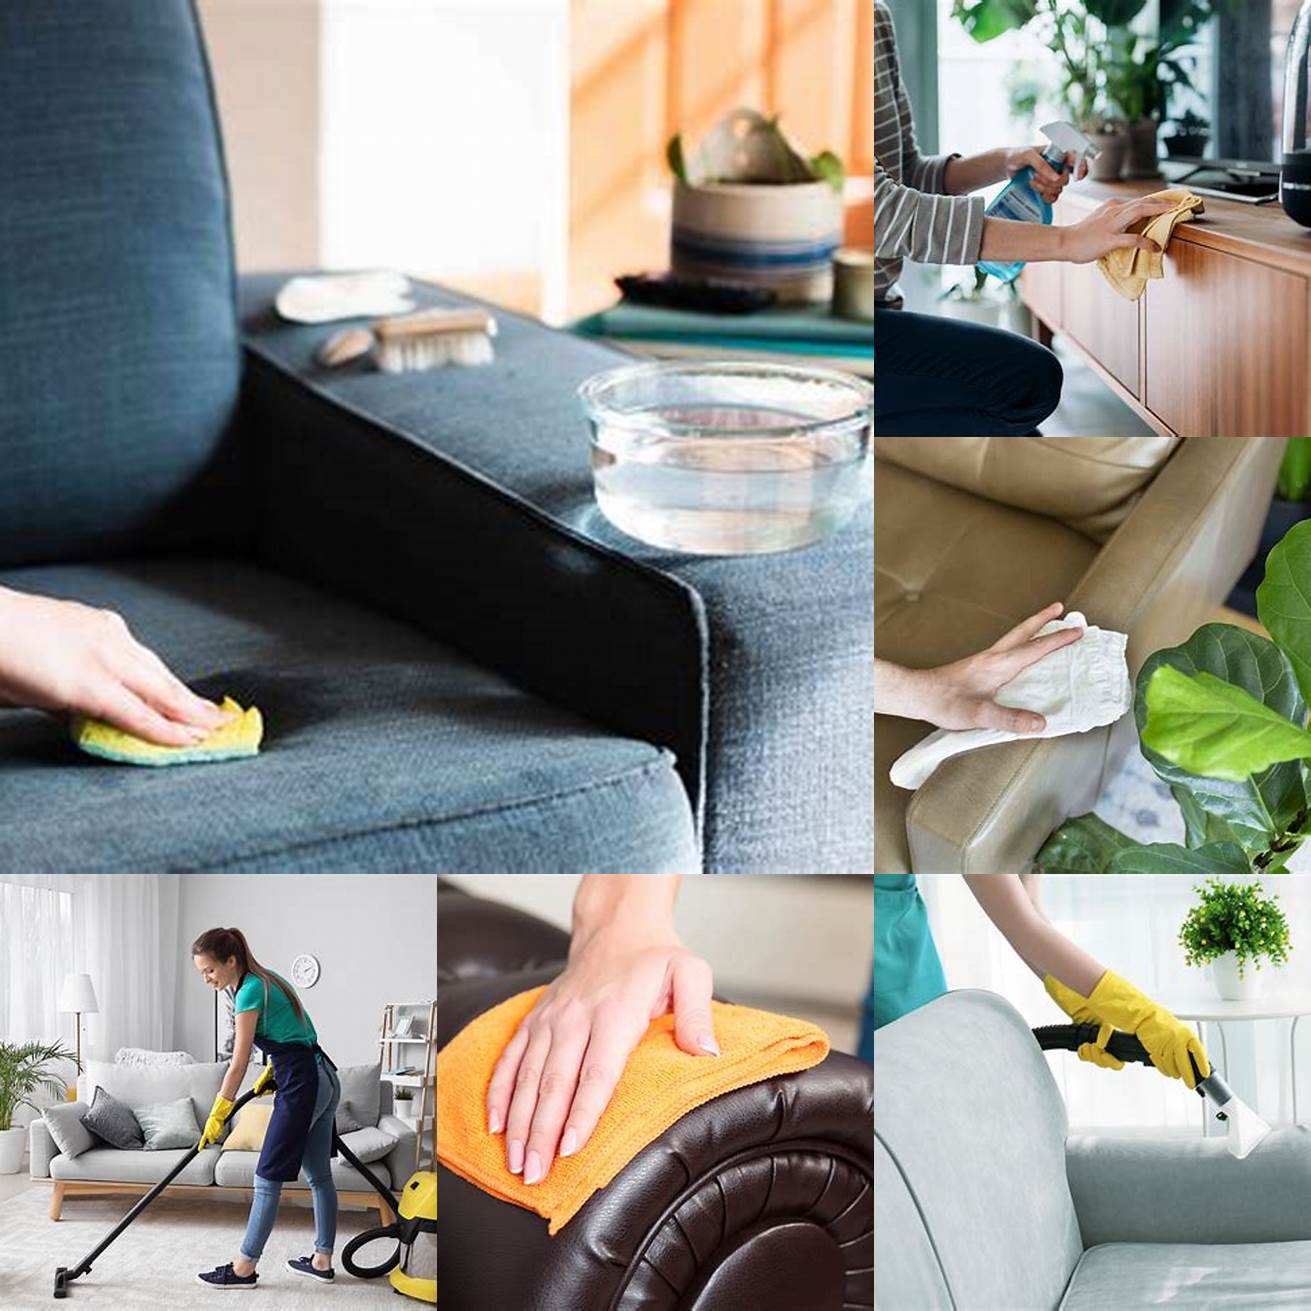 Clean your furniture regularly